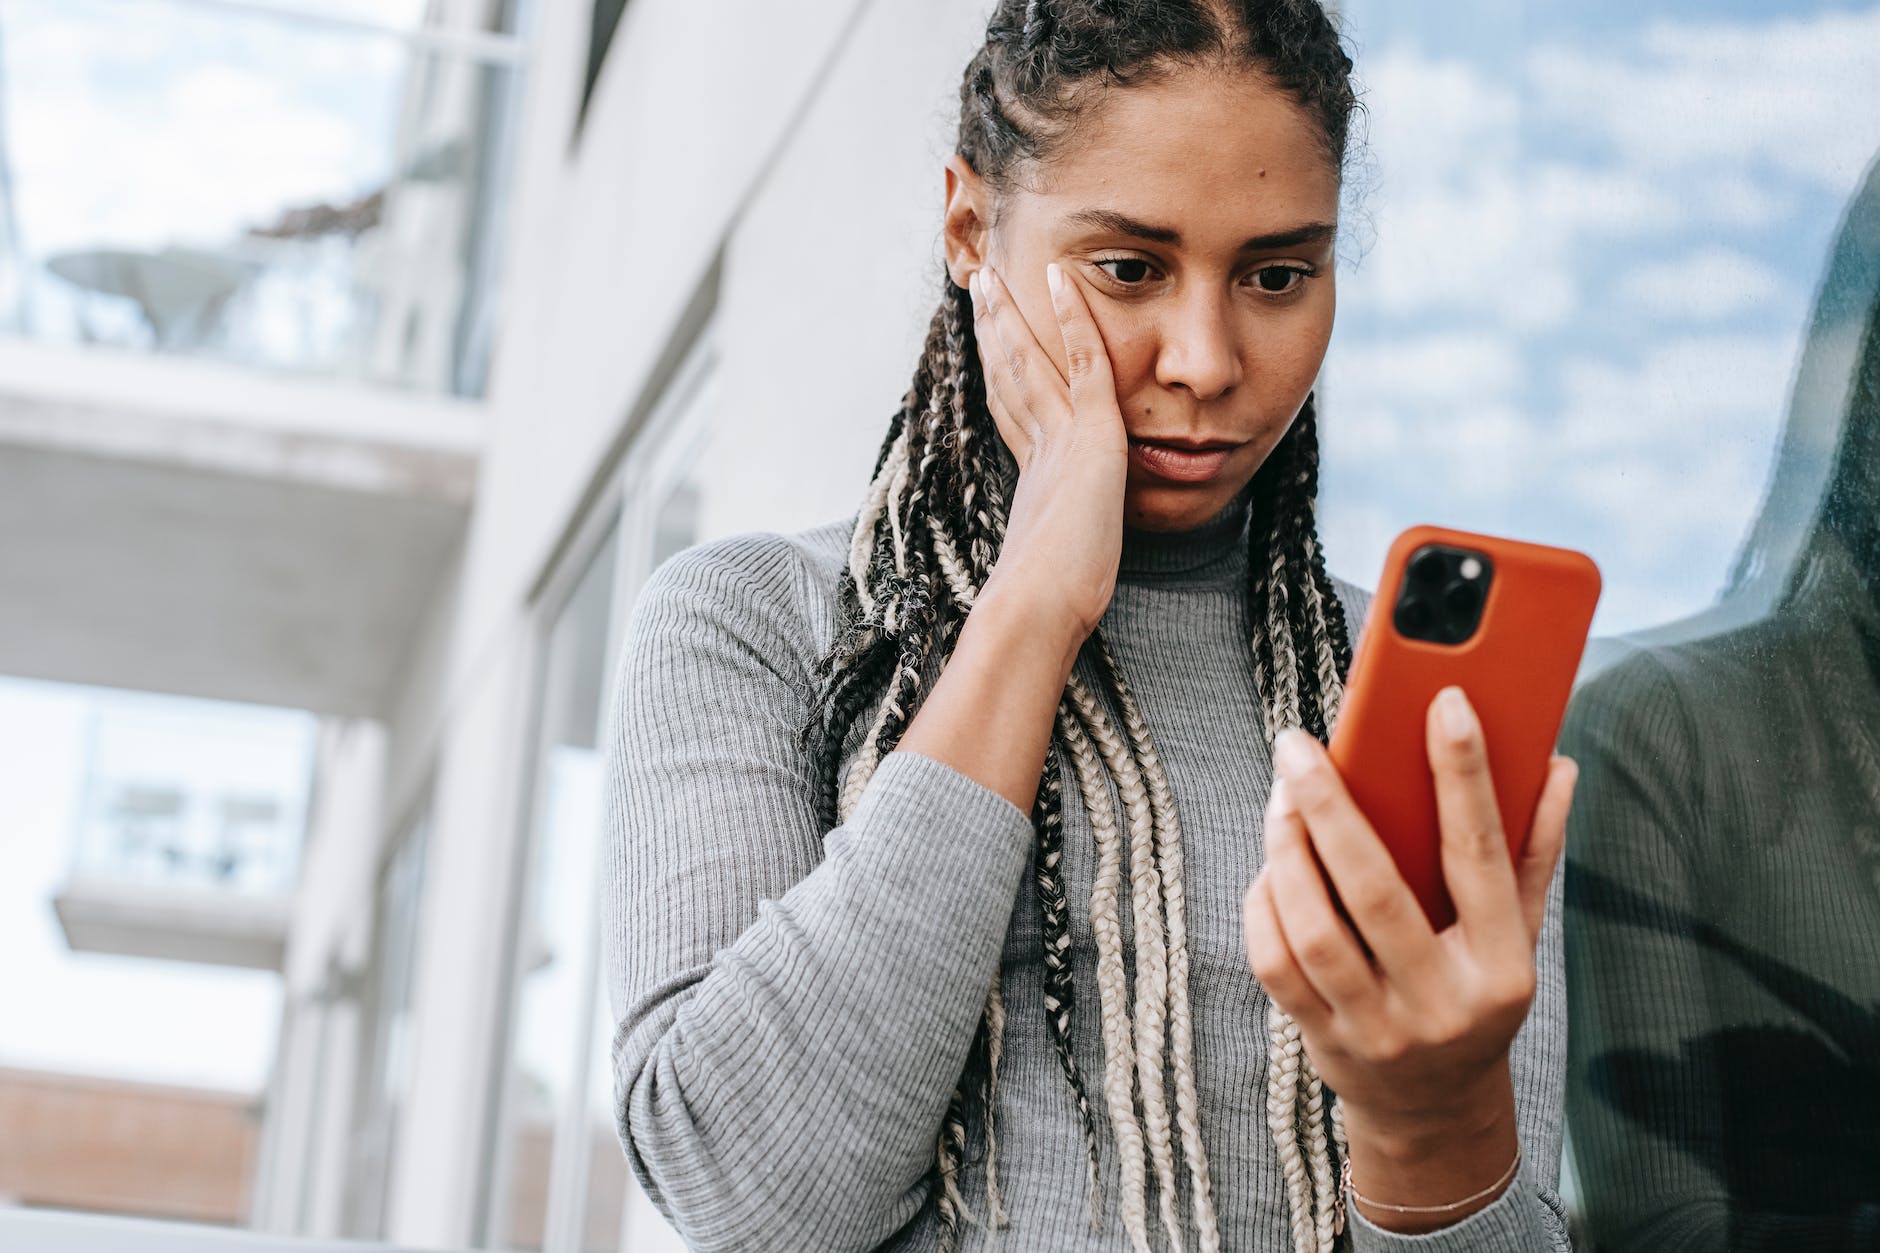 crop concerned black woman using smartphone on street fault vs responsibility